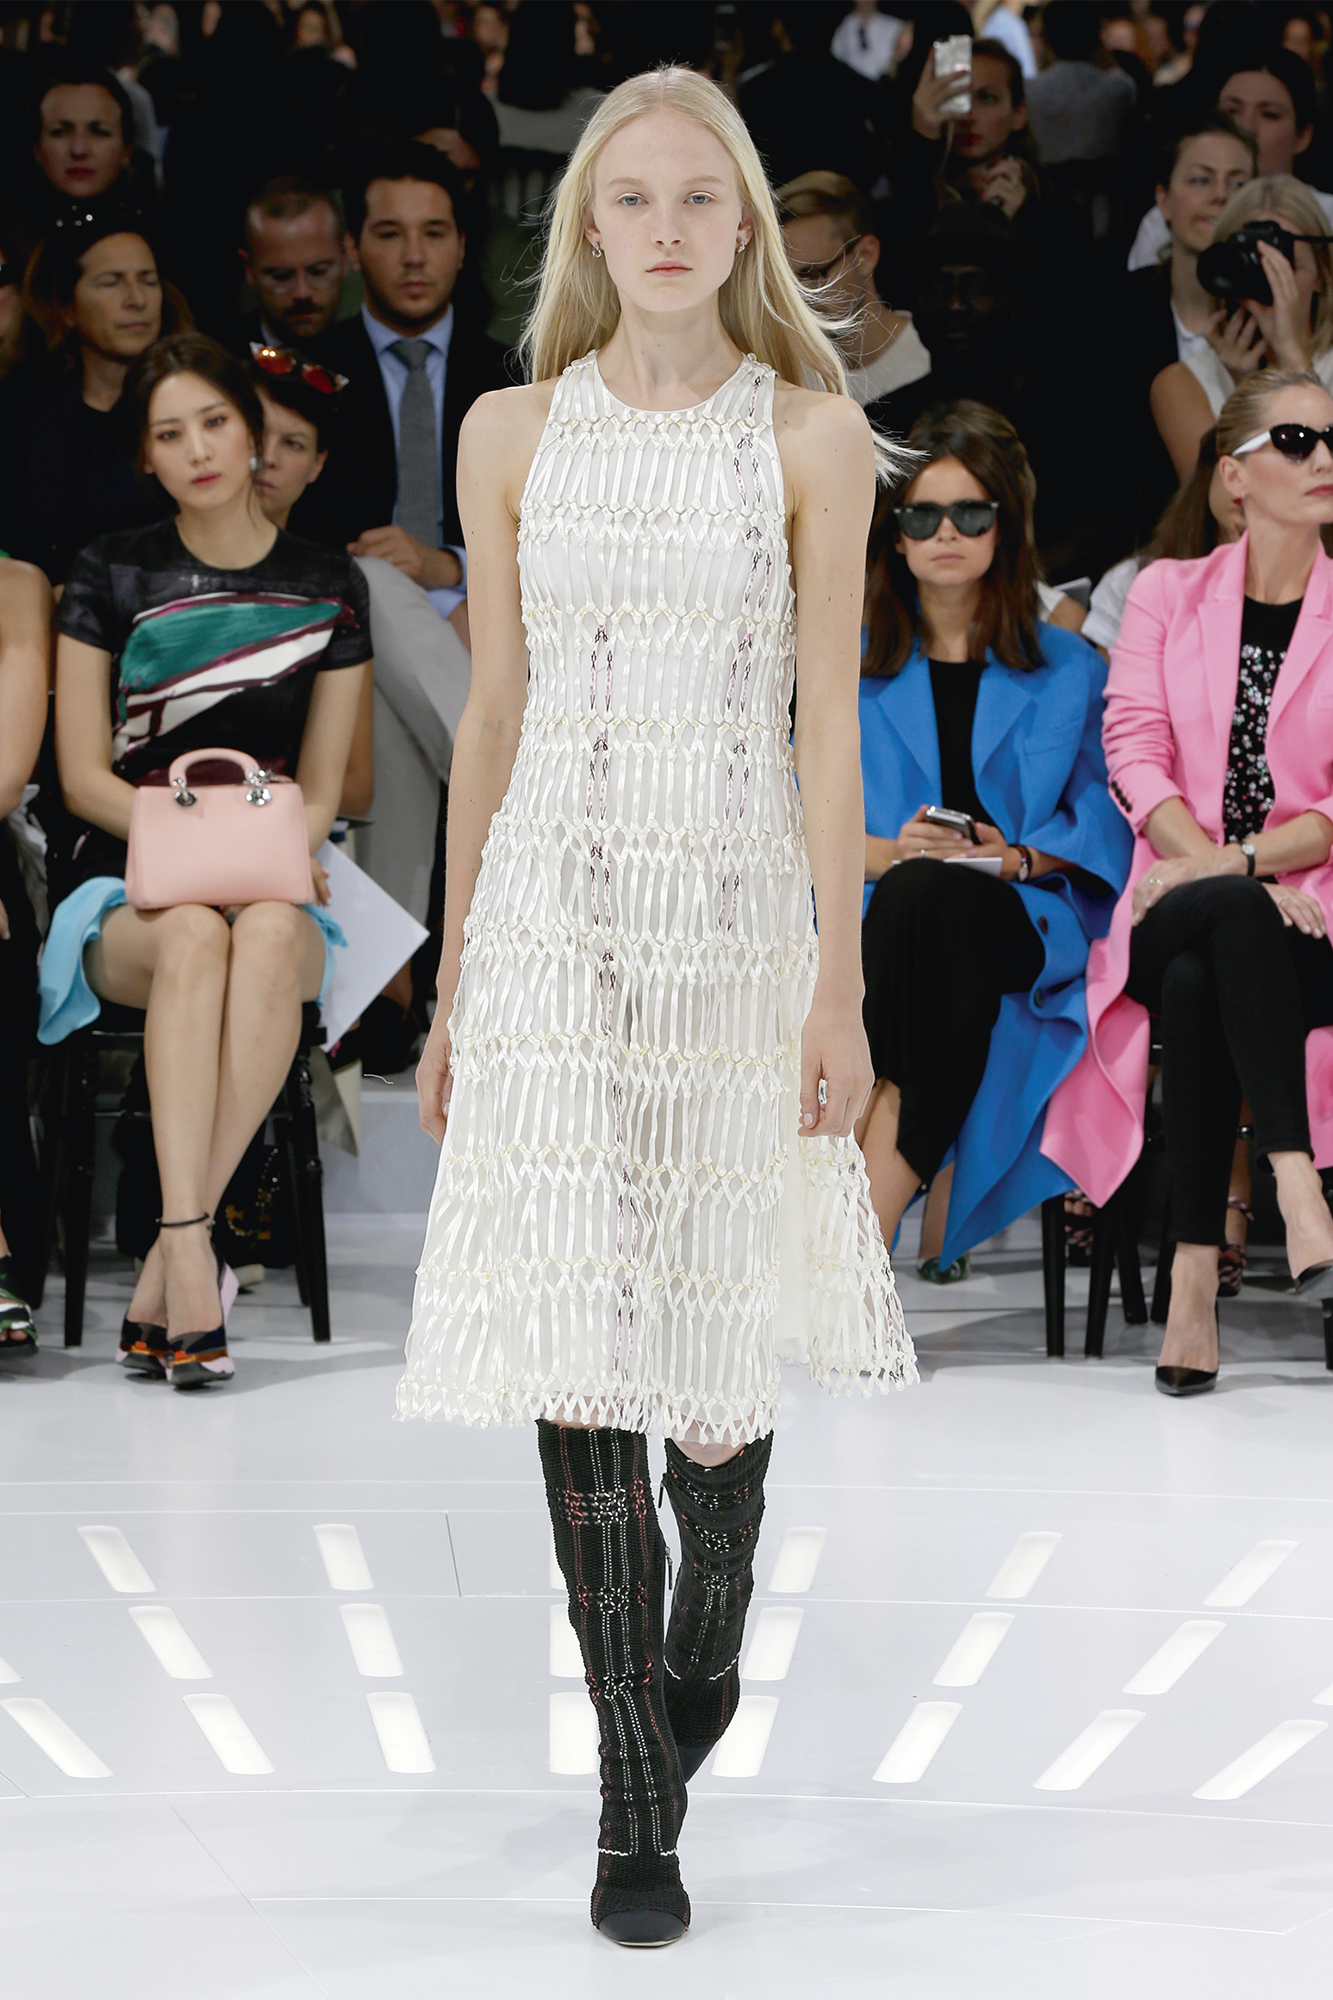 Christian Dior Haute Couture Spring-Summer Ready To Wear Dresses & Accessories Collection 2015-16 (33)